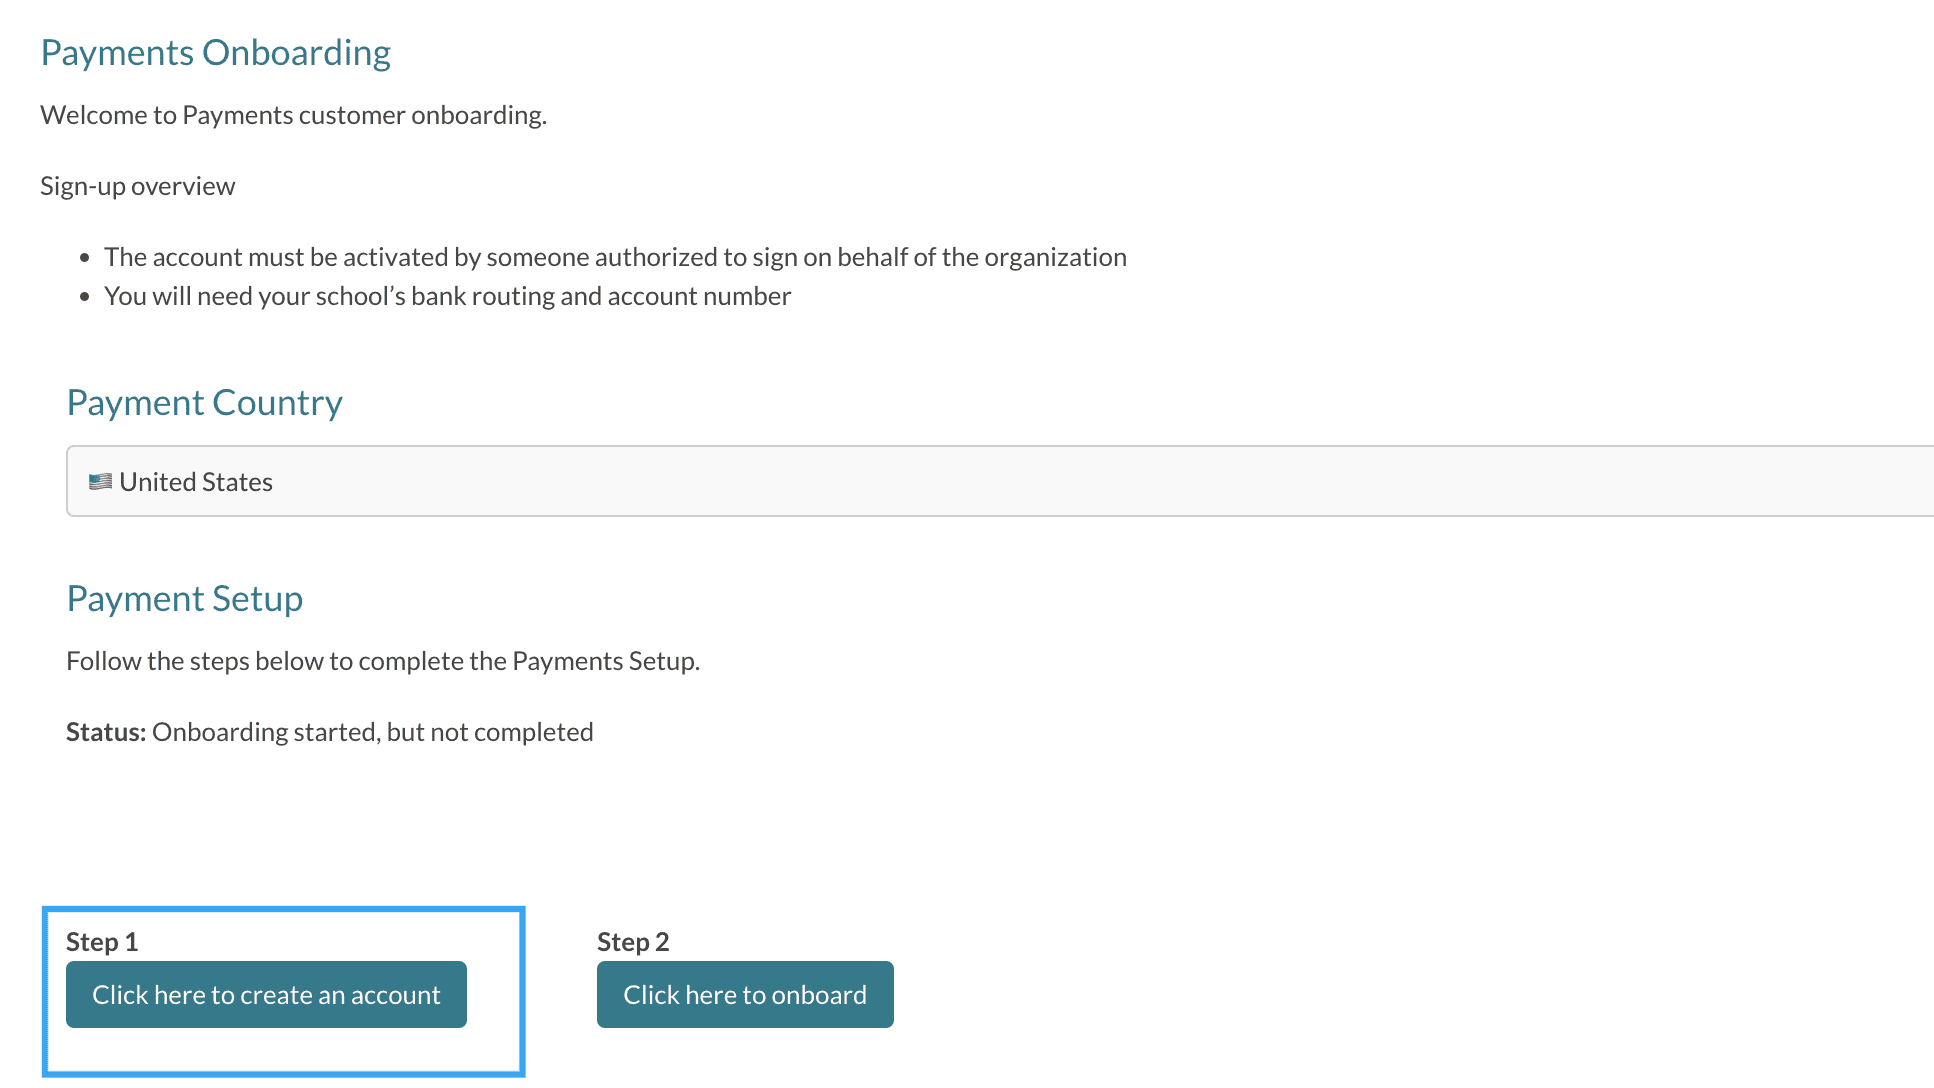 Payments onboarding page with a box around Step 1.